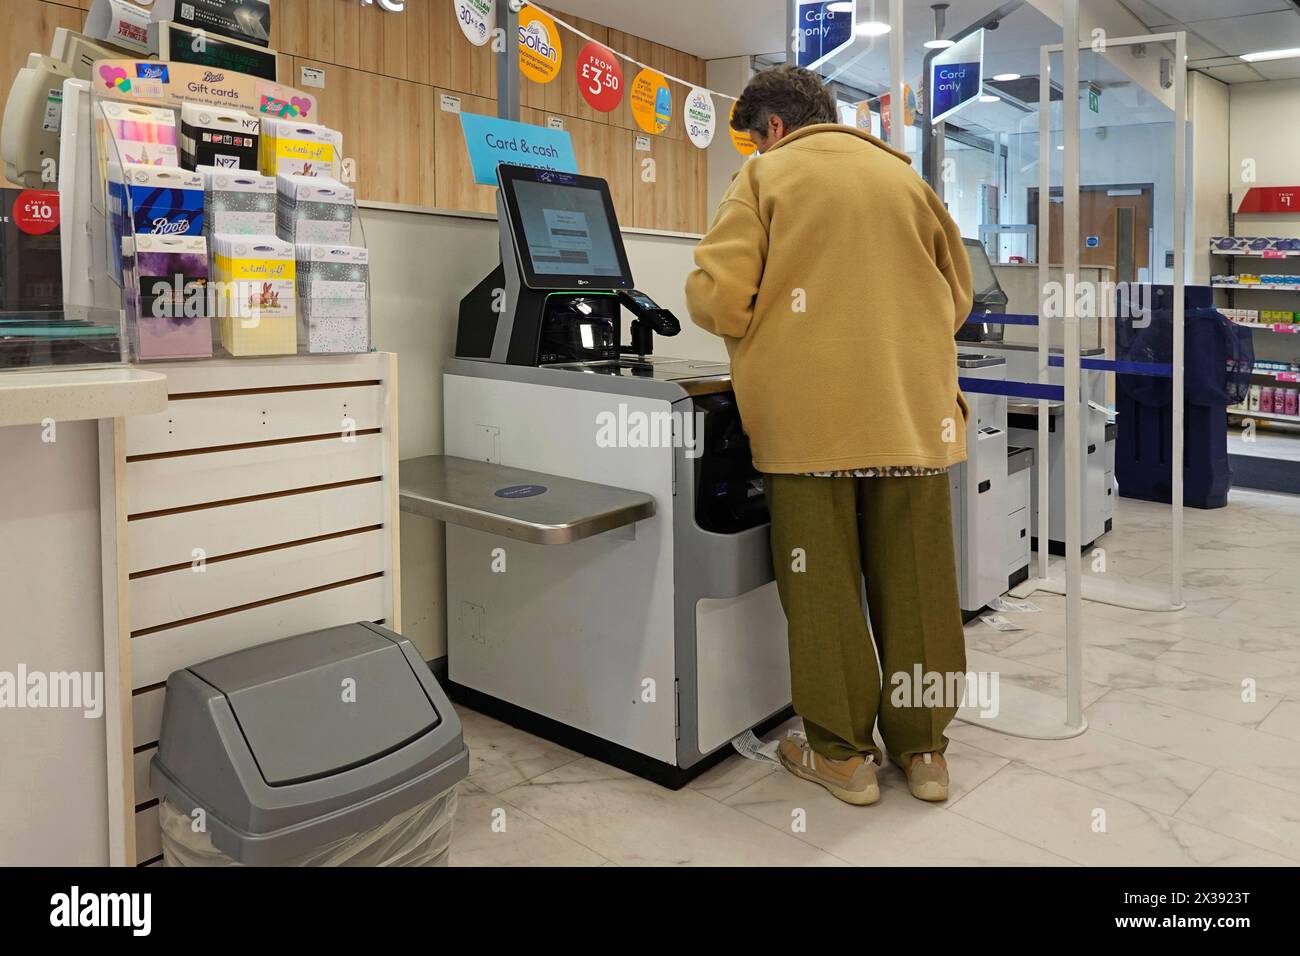 Boots The Chemist shop interior back view of model released pensioner woman perplexed by new instore automated payment till & screen Essex England UK Stock Photo